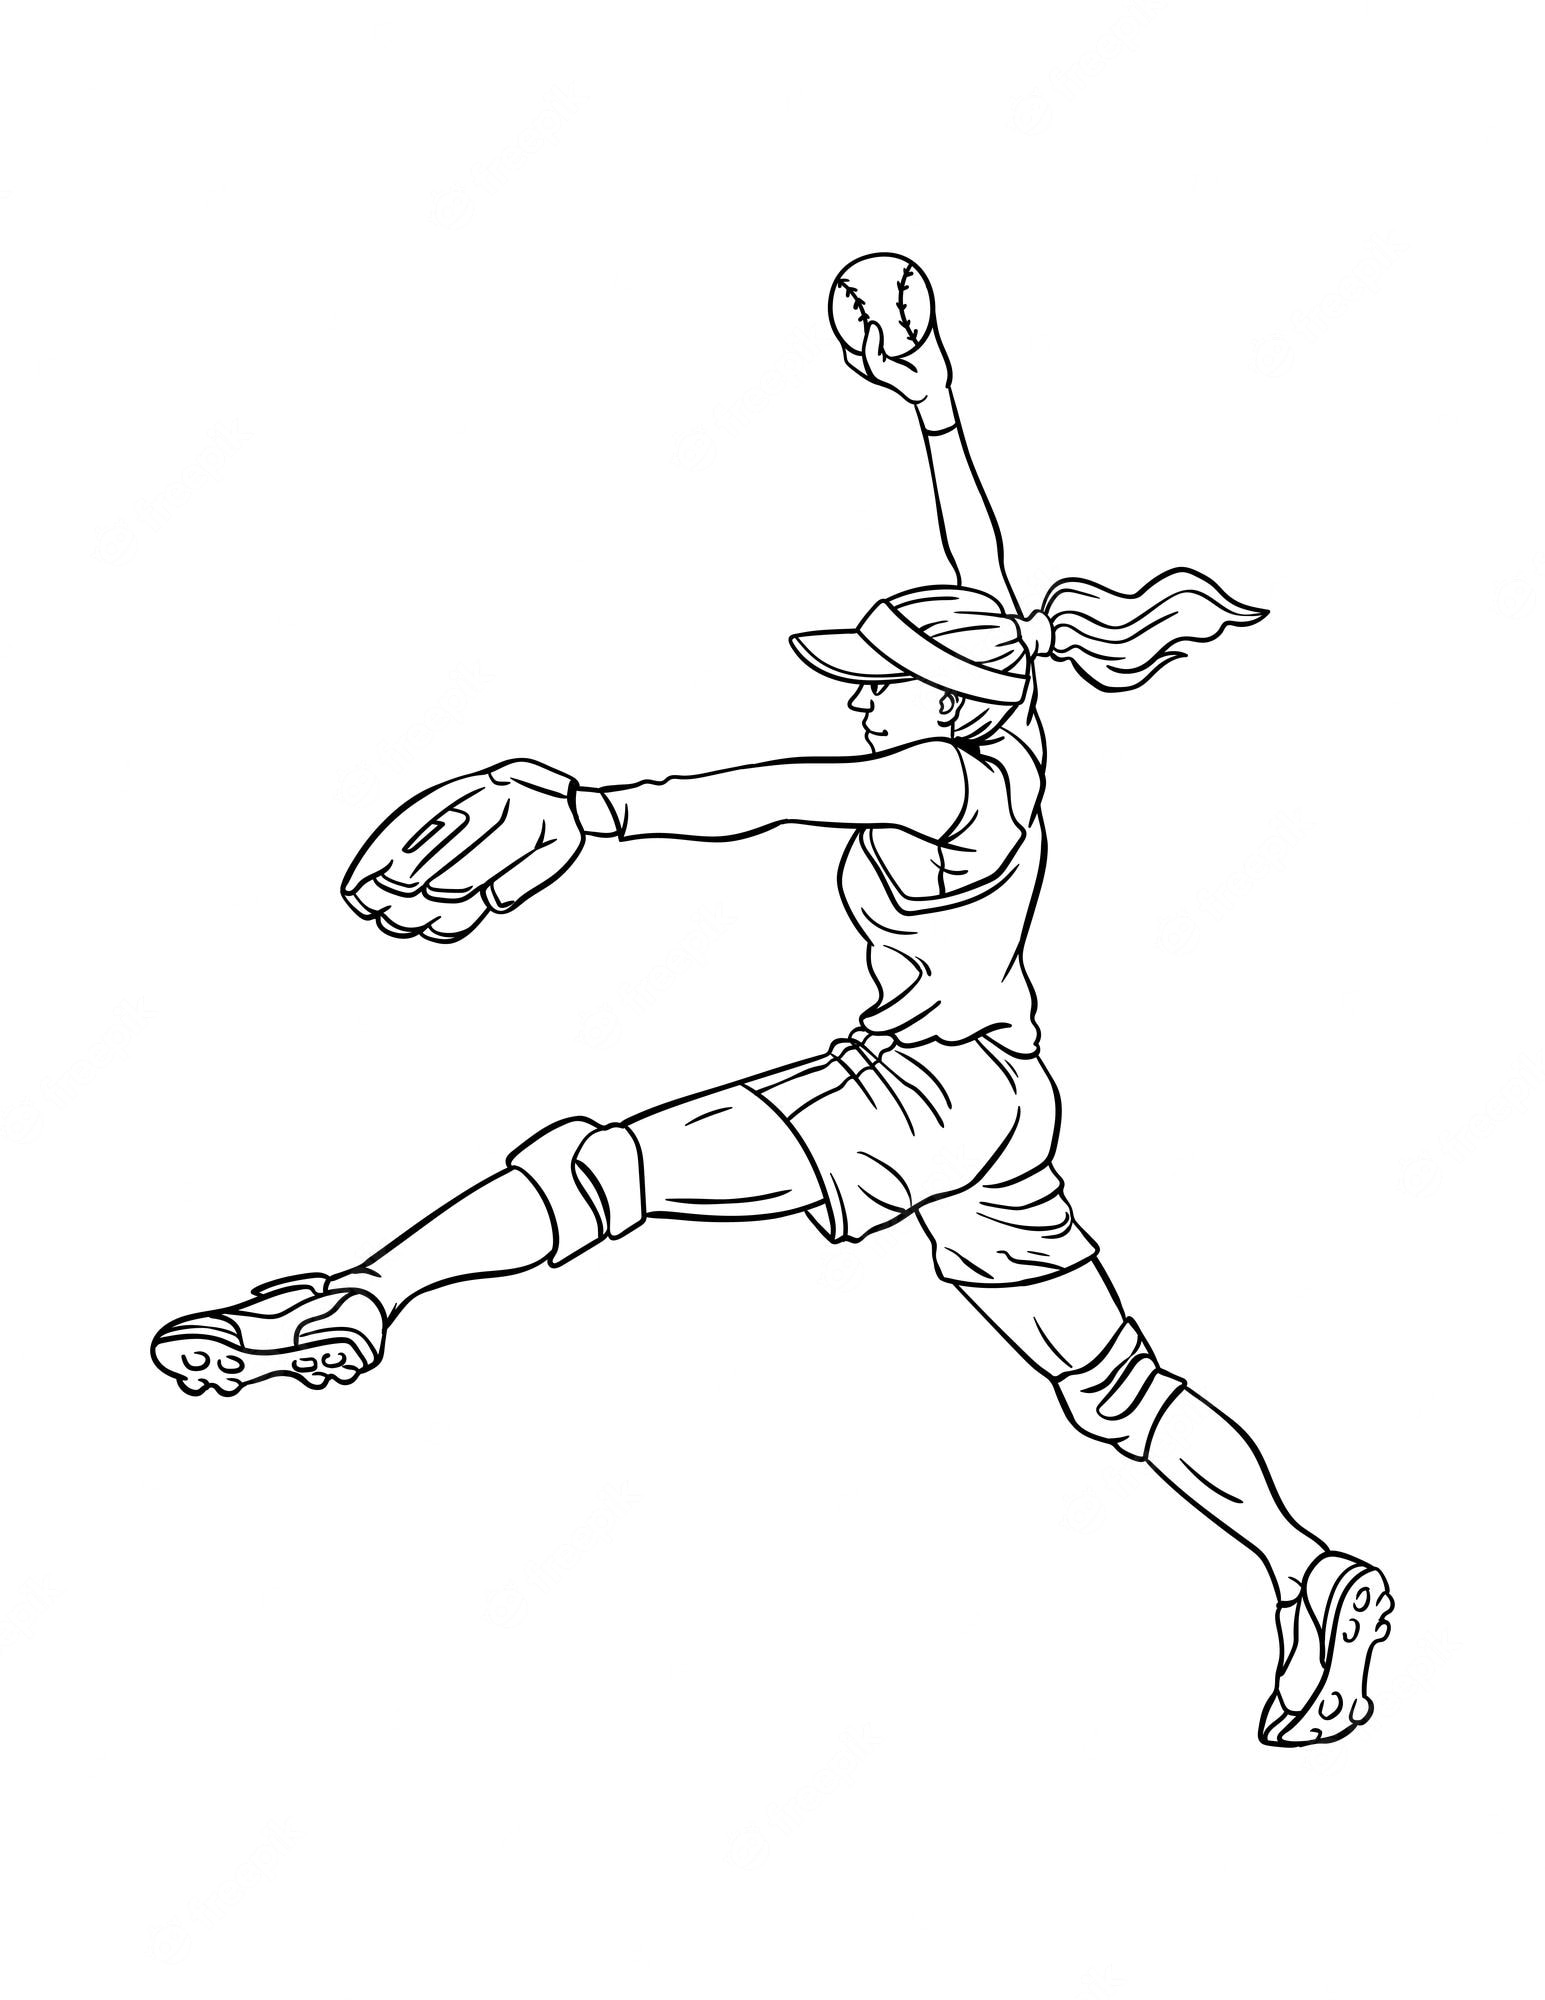 Premium Vector | Softball isolated coloring page for kids